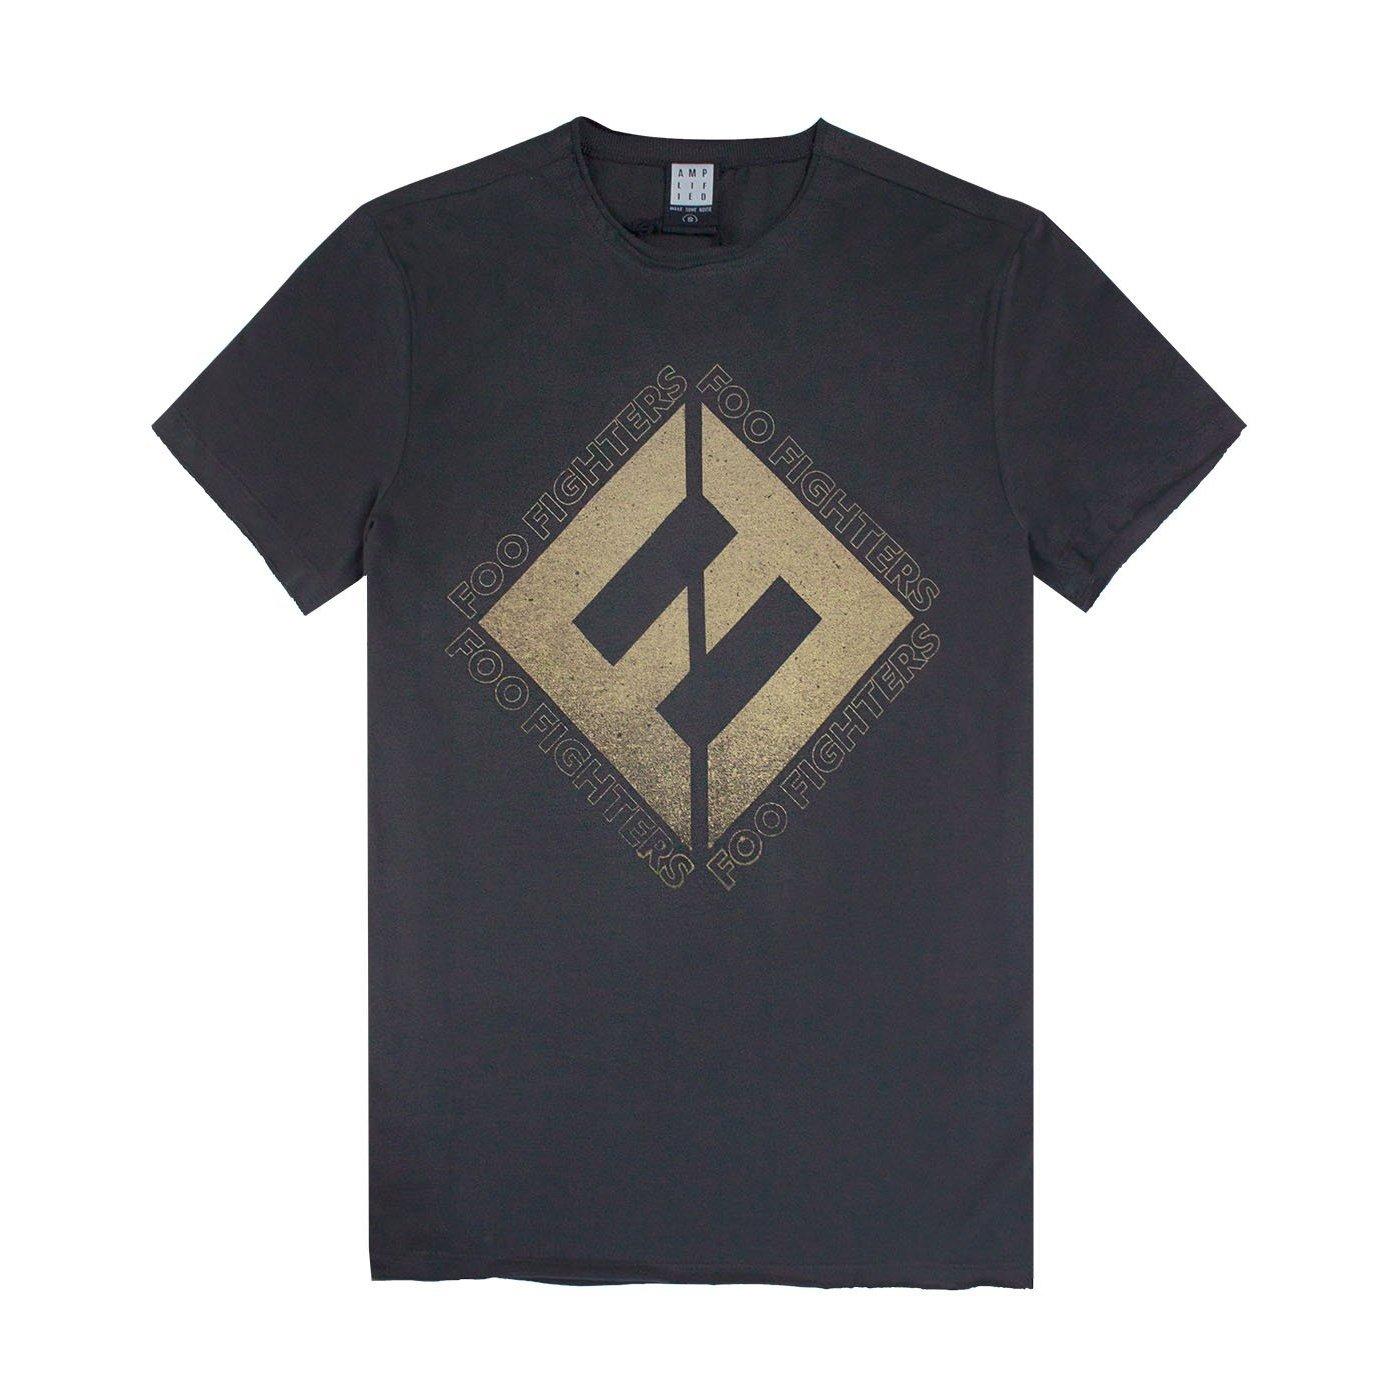 Foo Fighters Concrete And Gold Tshirt Herren Charcoal Black XS von Amplified